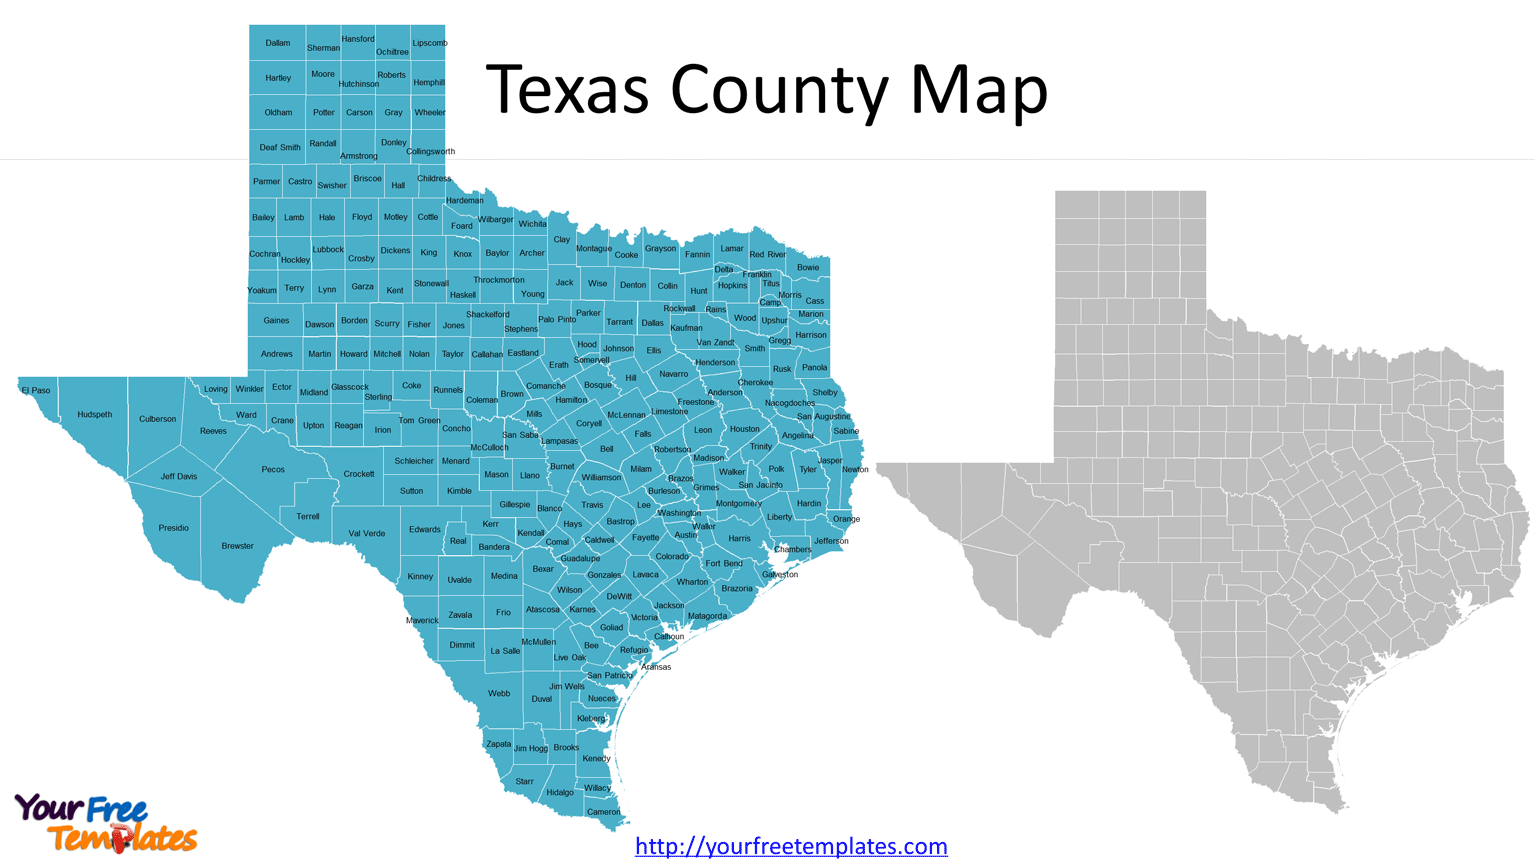 There are 253 Counties in our Texas County Map.